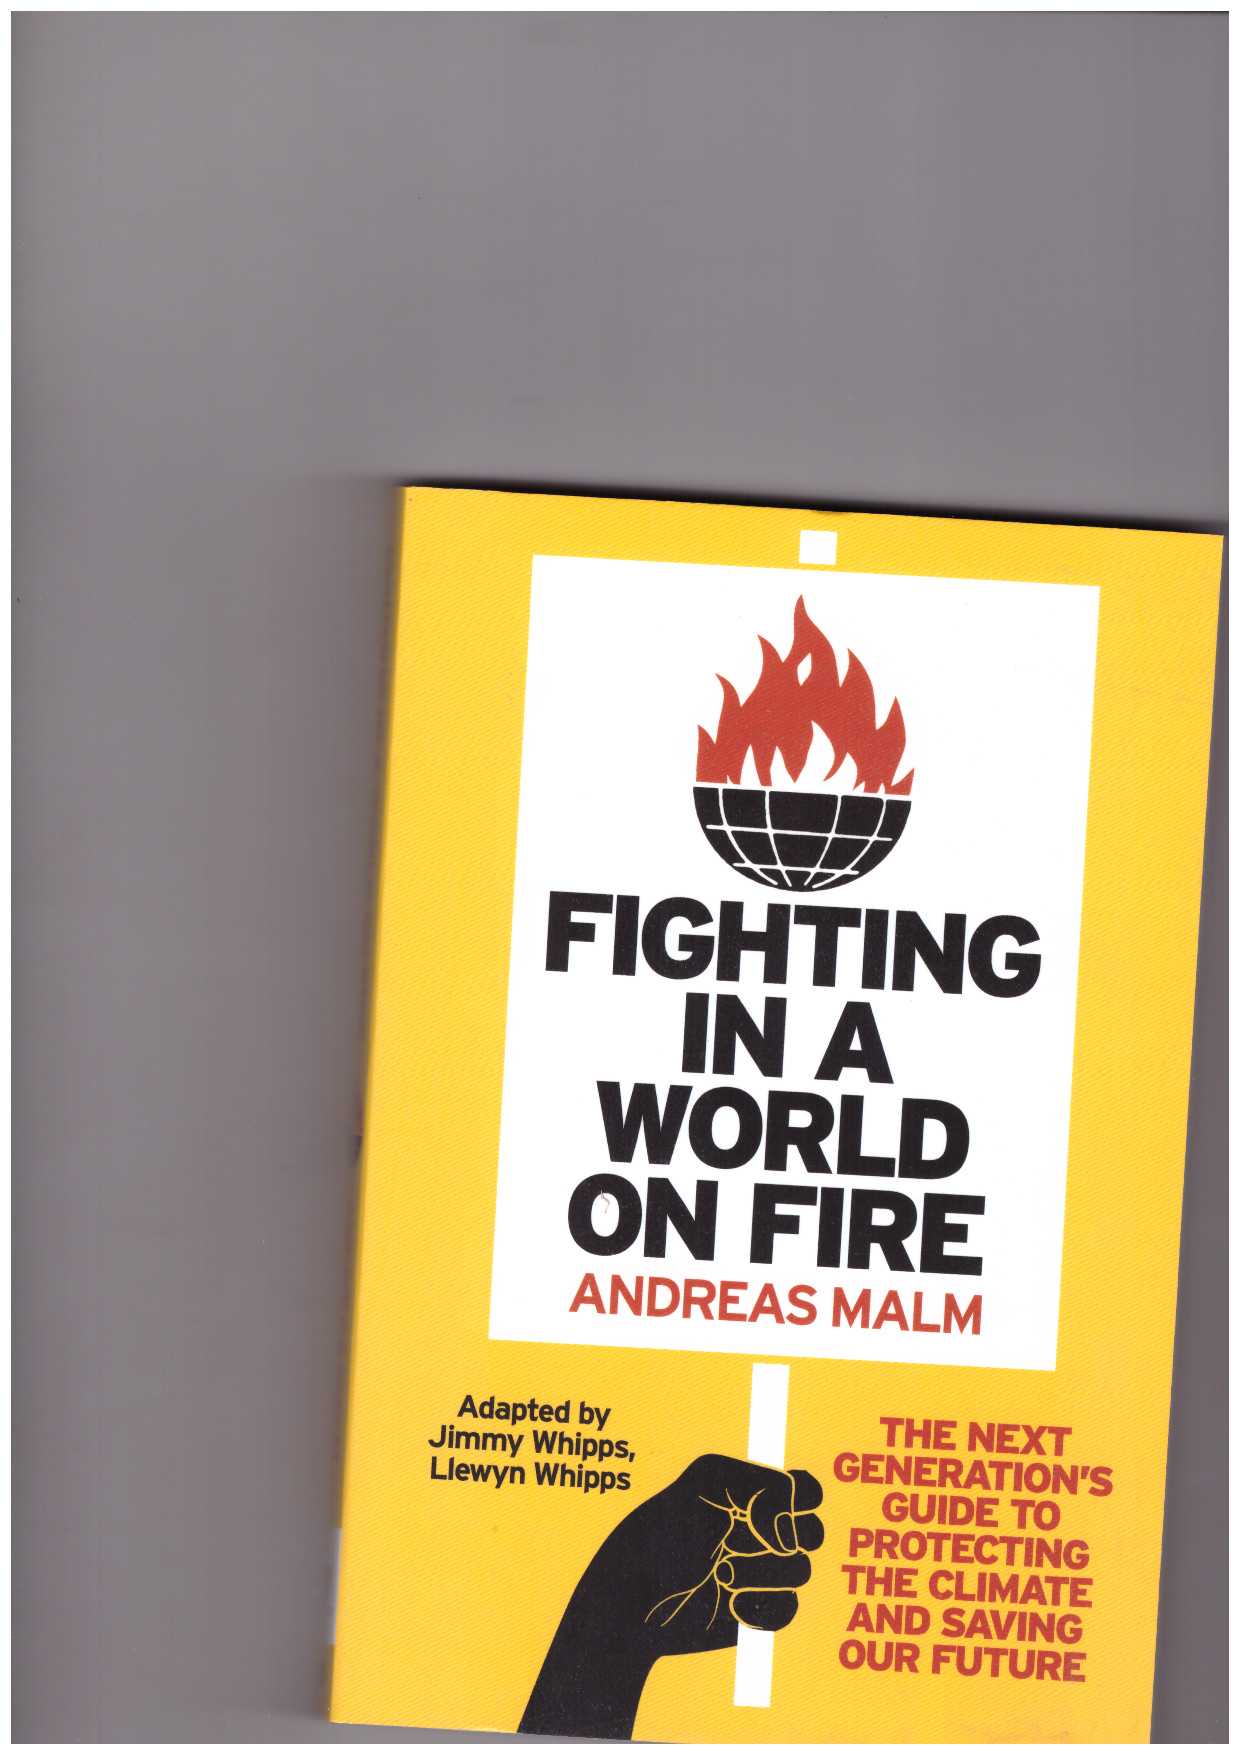 MALM, Andreas - Fighting in a World on Fire. The Next Generation's Guide to Protecting the Climate and Saving Our Future